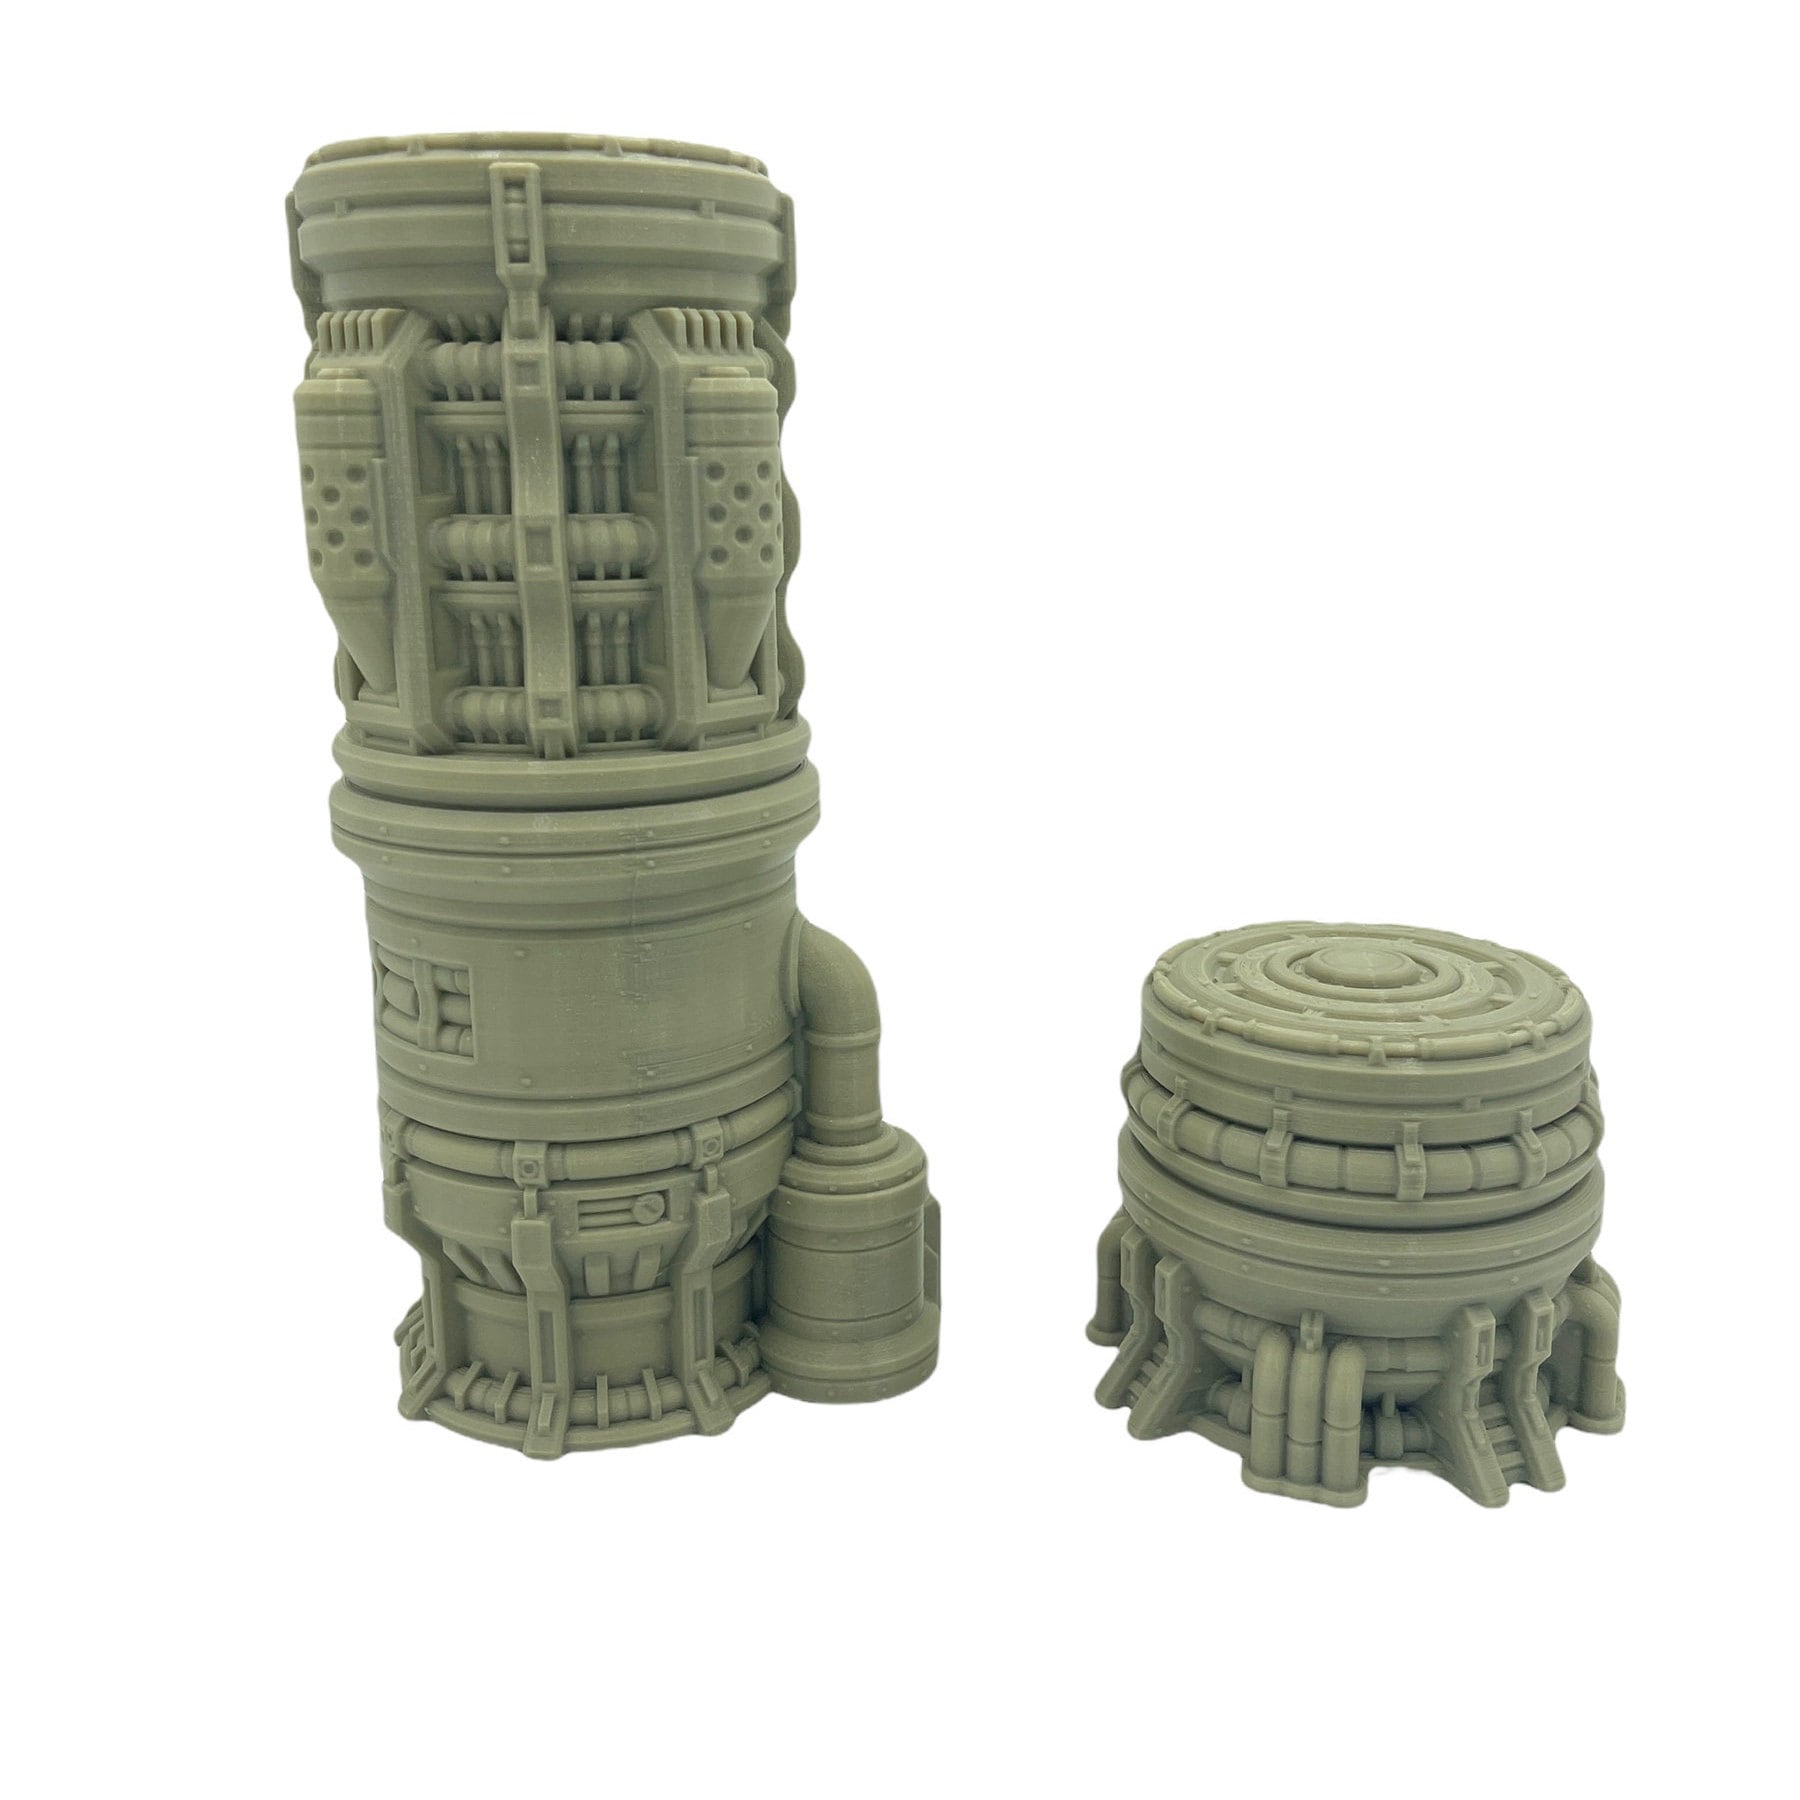 Outpost 21 - Gas Silos Scatter Pack / Forbidden Prints / RPG and Wargame 3d Printed Tabletop Terrain / Licensed Printer